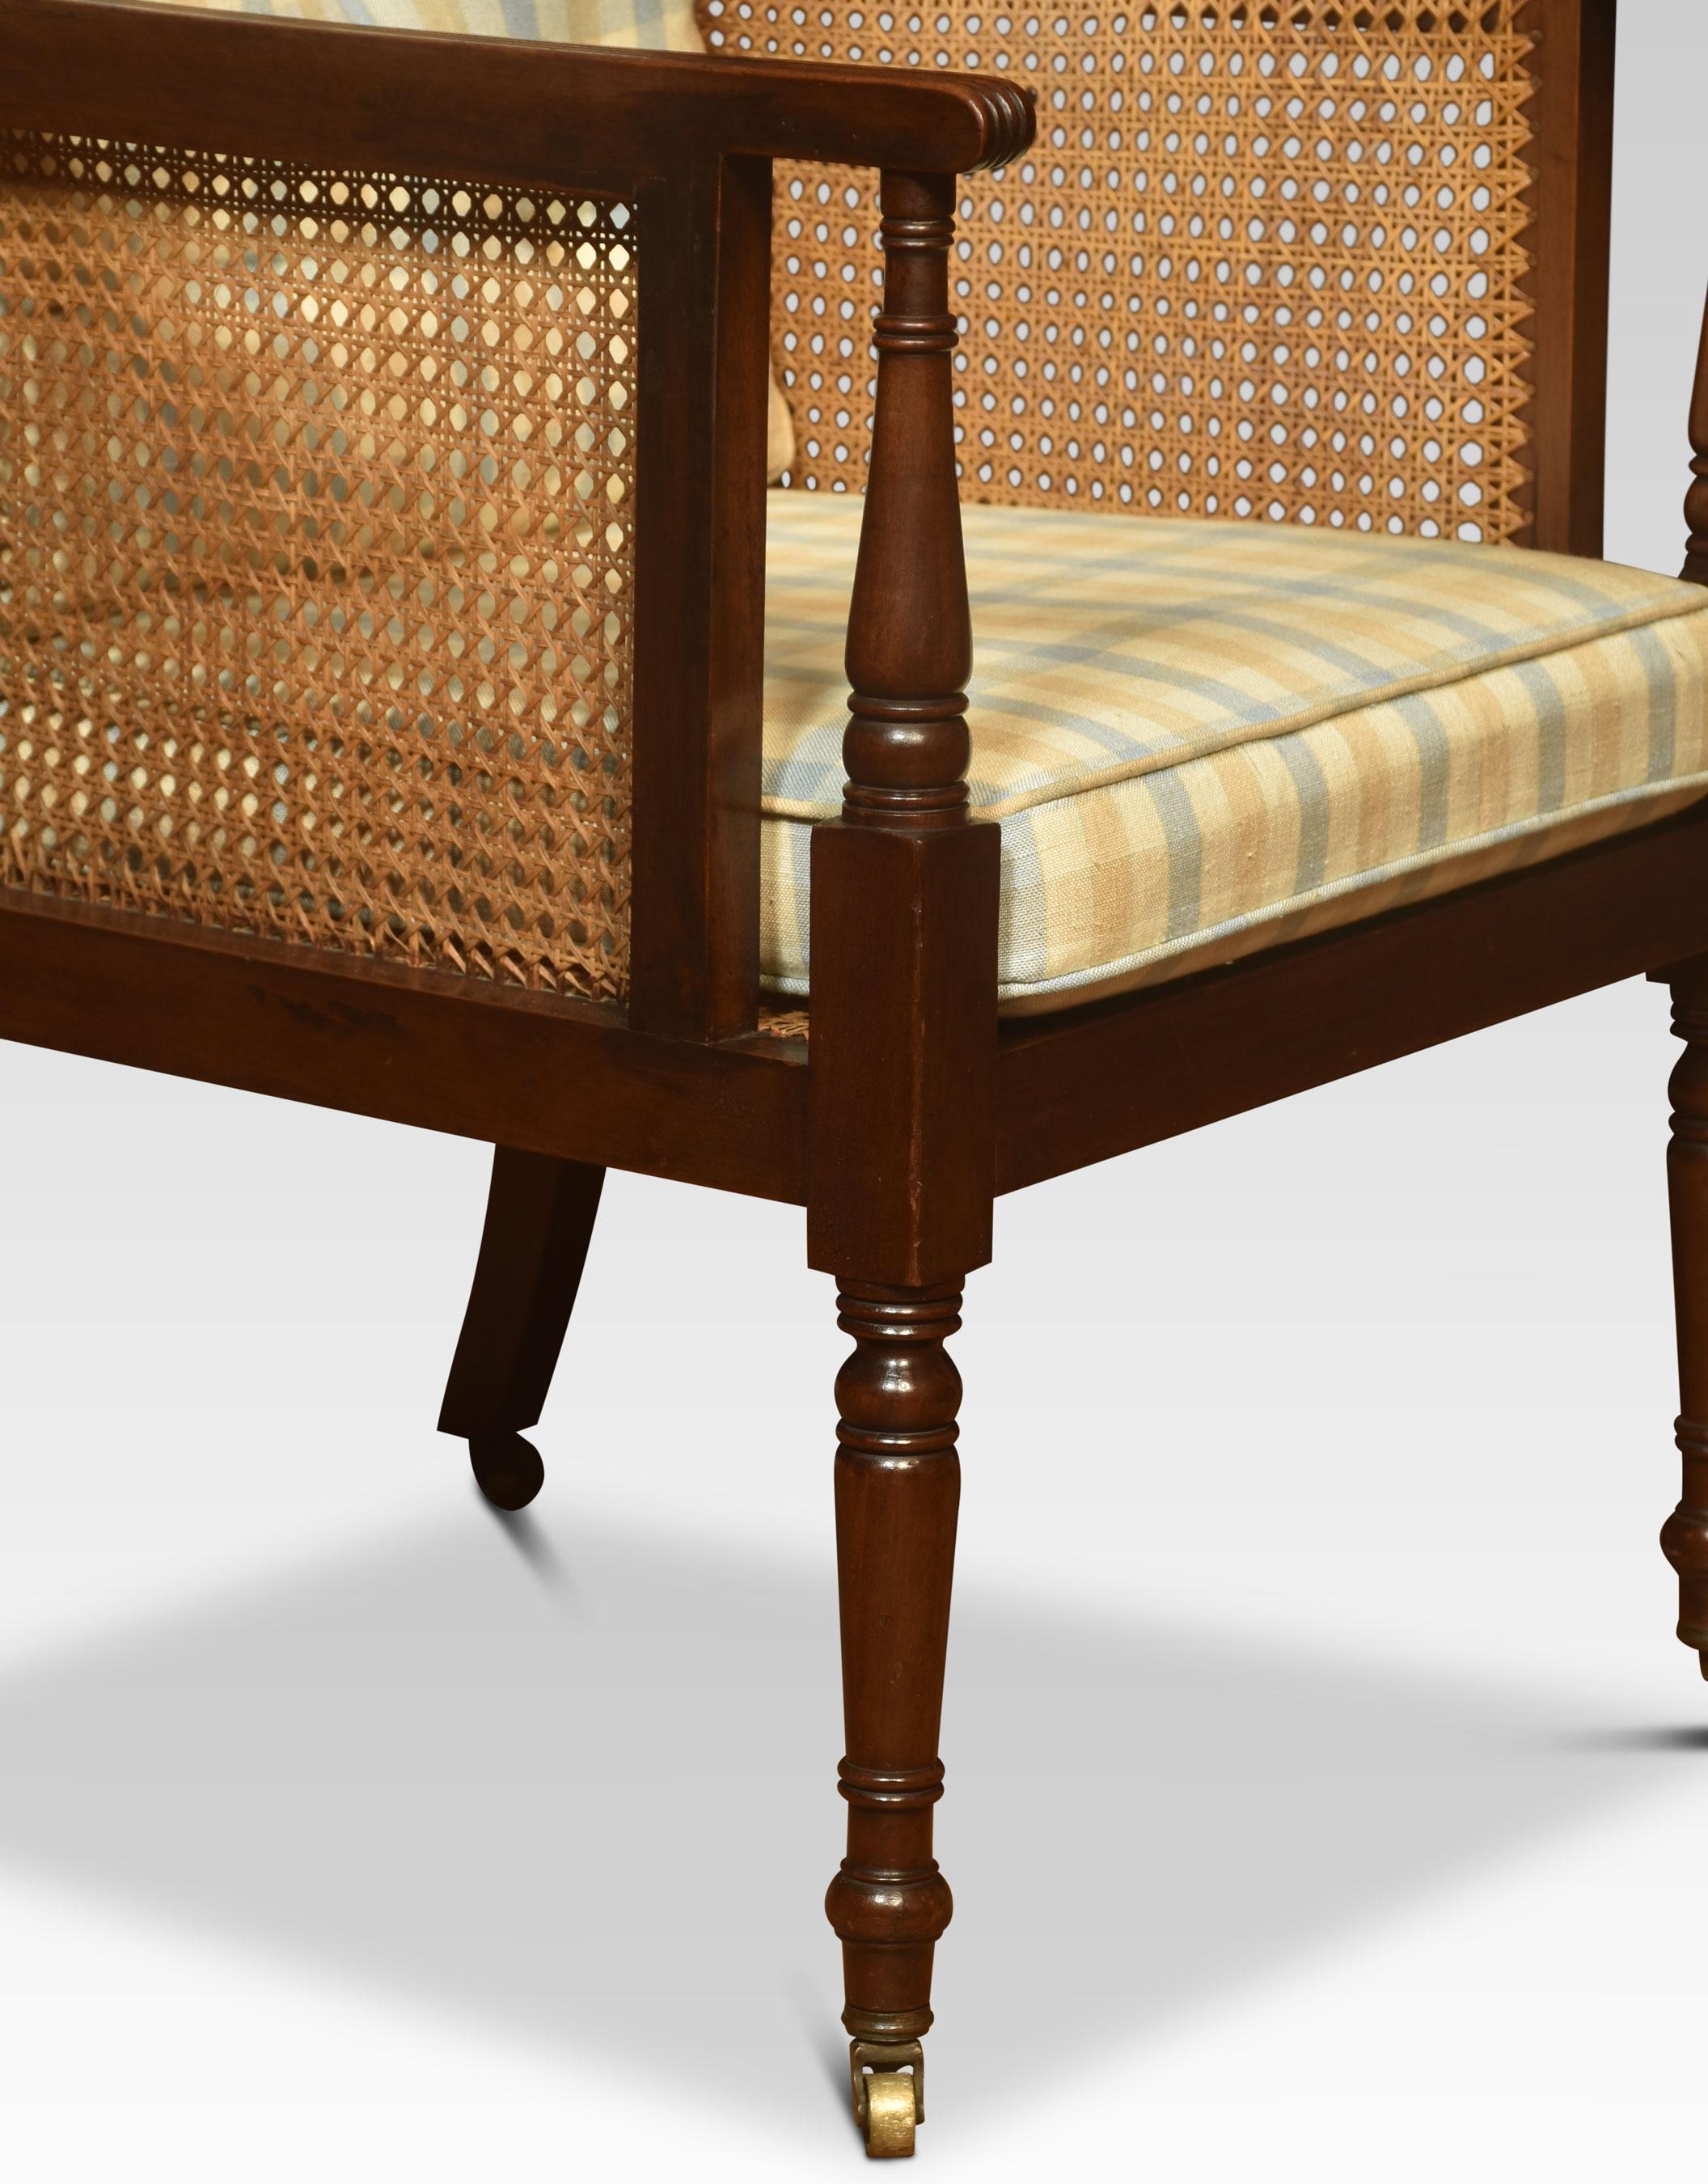 Pair of 19th century Bergere armchair, the solid frame and inset bergere back and arms, above removable cushions. Raised up on turned reeded tapering front legs.
Dimensions
Height 37.5 inches height to seat 17.5 Inches
Width 21 inches
Depth 26.5